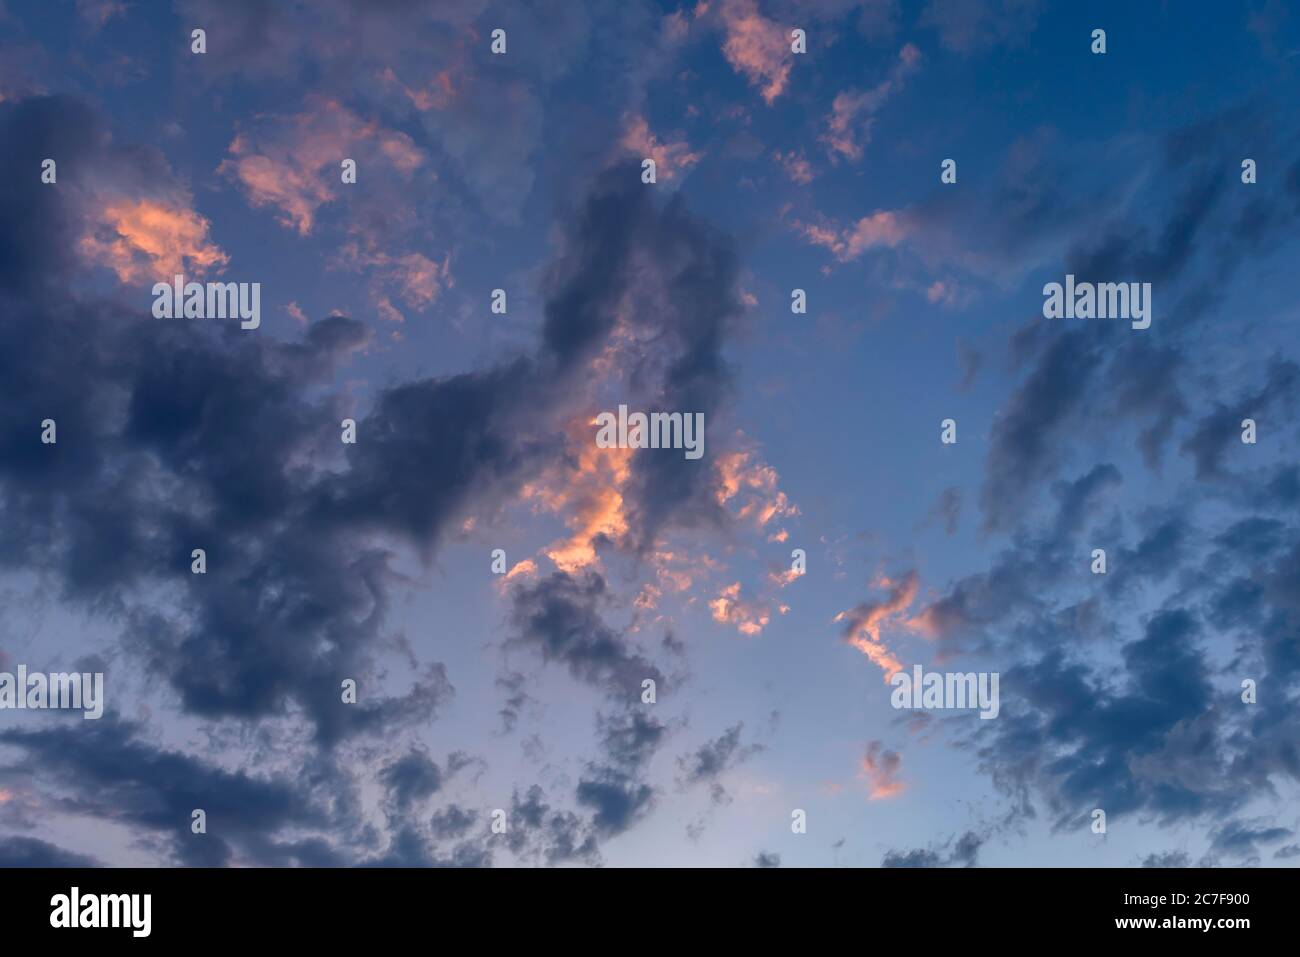 Clouds in the evening sky, Bavaria, Germany Stock Photo